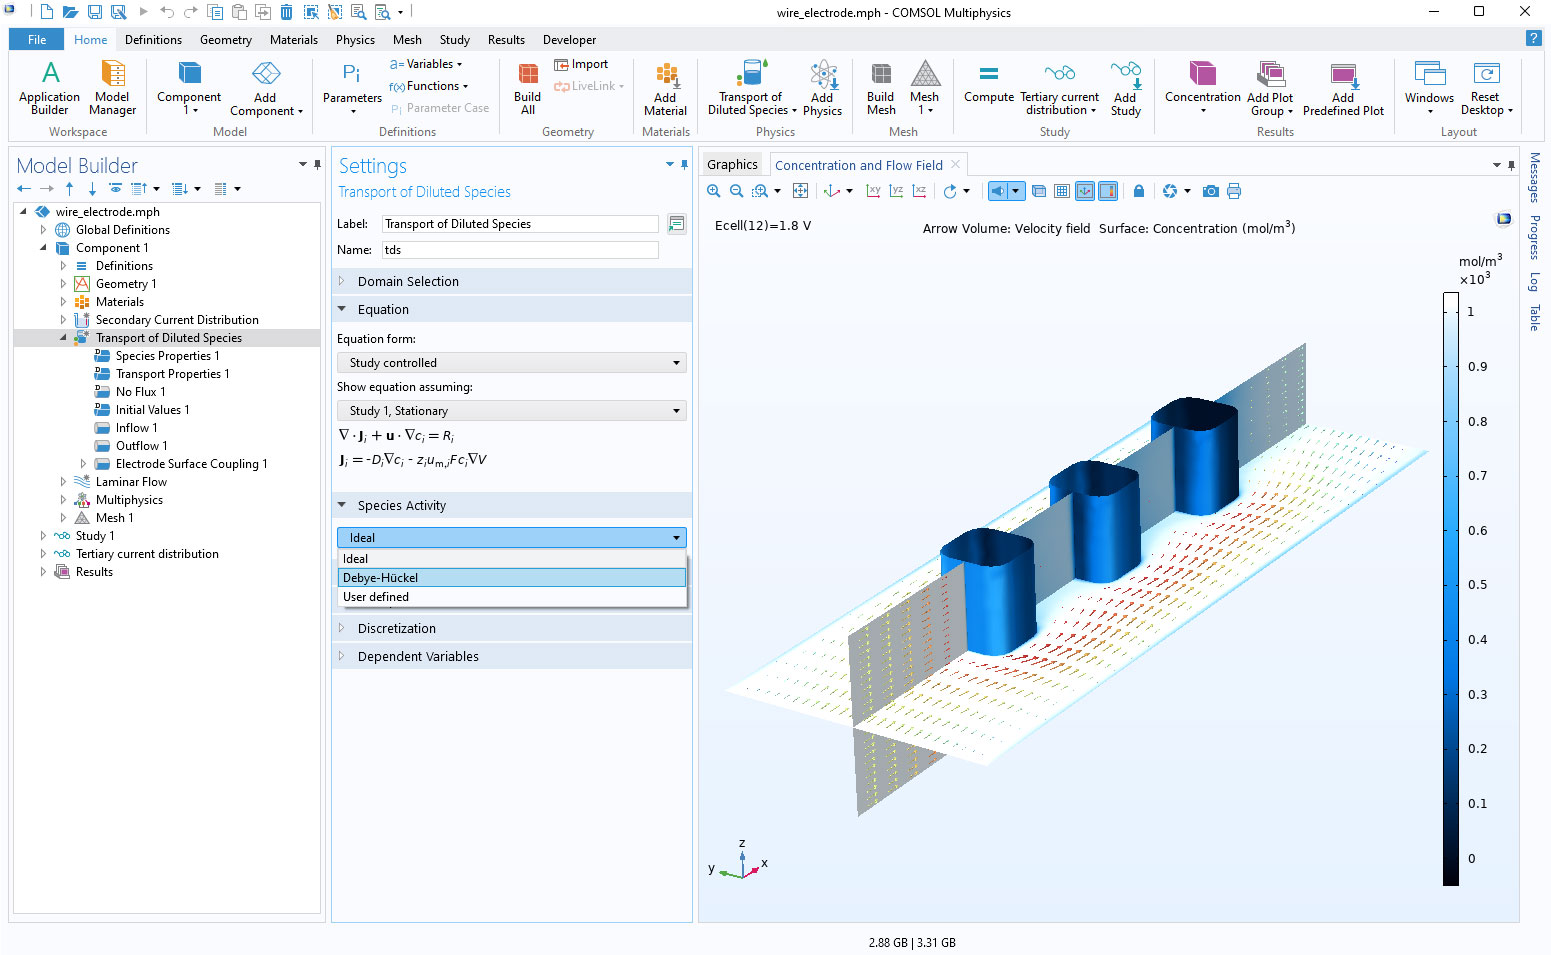 The COMSOL Multiphysics UI showing the Model Builder with the Transport of Diluted Species node highlighted, the corresponding Settings window, and a wire electrode model in the Graphics window.